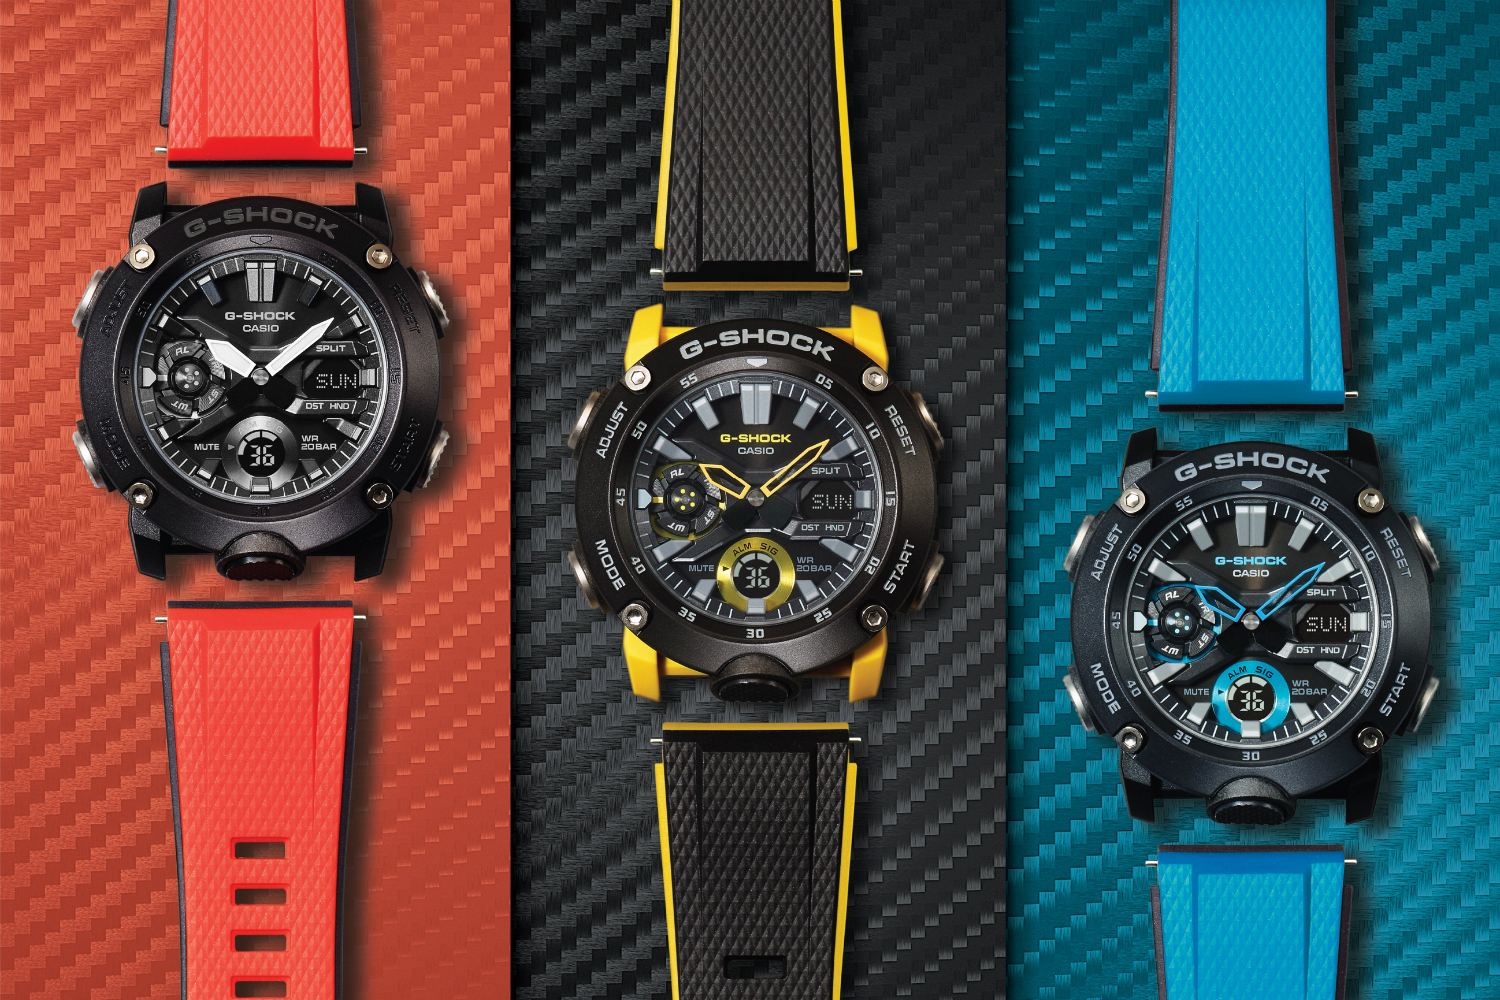 G Shock Carbon Series watches.